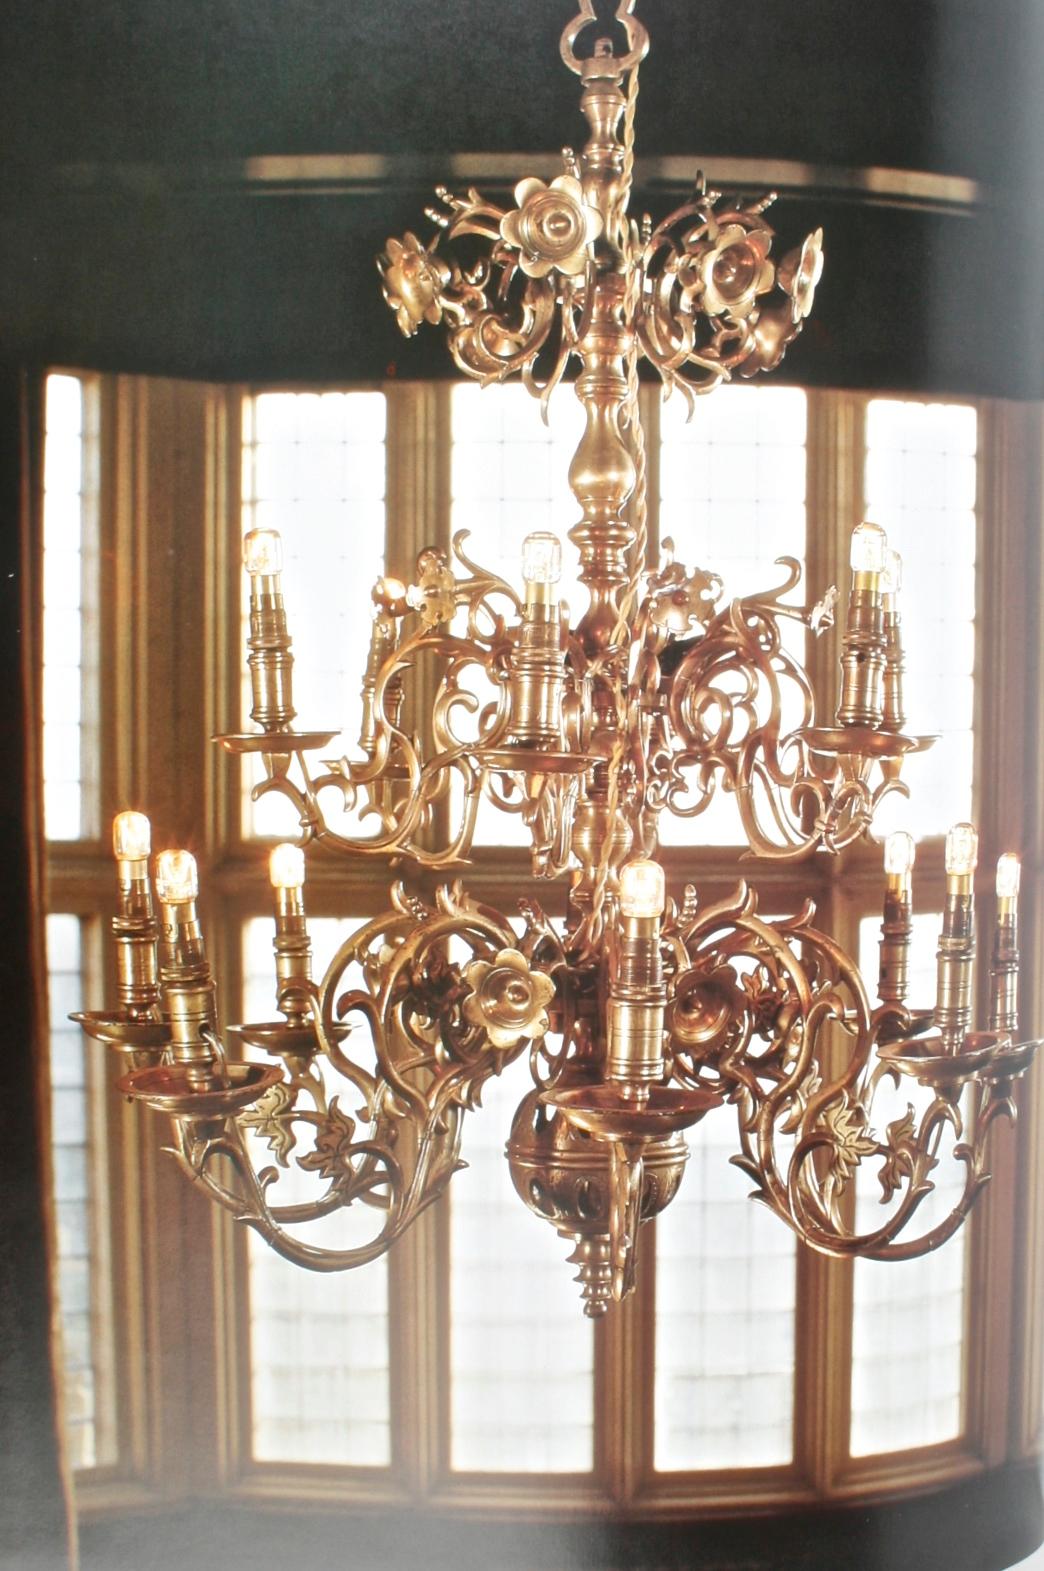 Chandeliers by Elizabeth Hilliard, 1st US Edition hardcover with dust jacket. Bulfinch Press / Little Brown & Co, Boston, 2001. 208 pp. The chapters are: early lighting; brass chandeliers; Venetian glass; 18th and 19th c elegance; enlightened